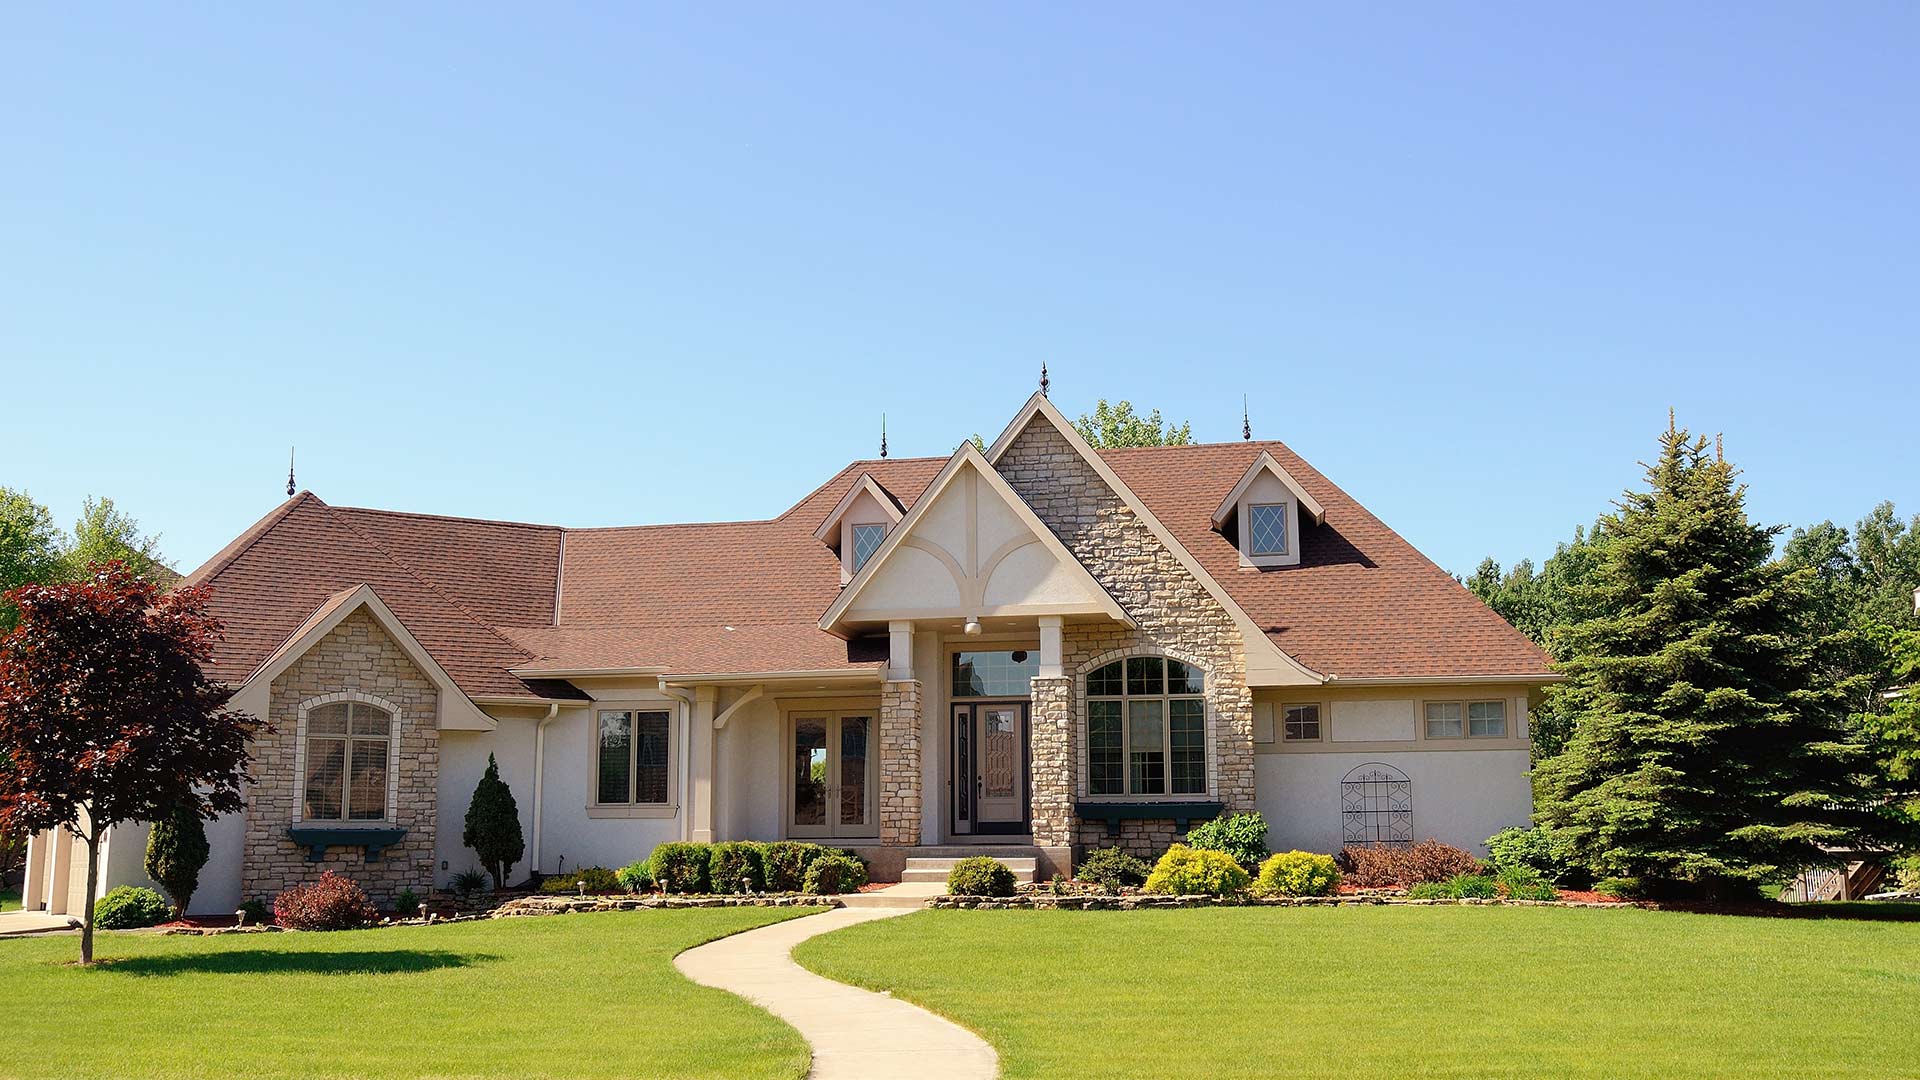 A beautiful home in Montrose, Colorado with a freshly mowed lawn.